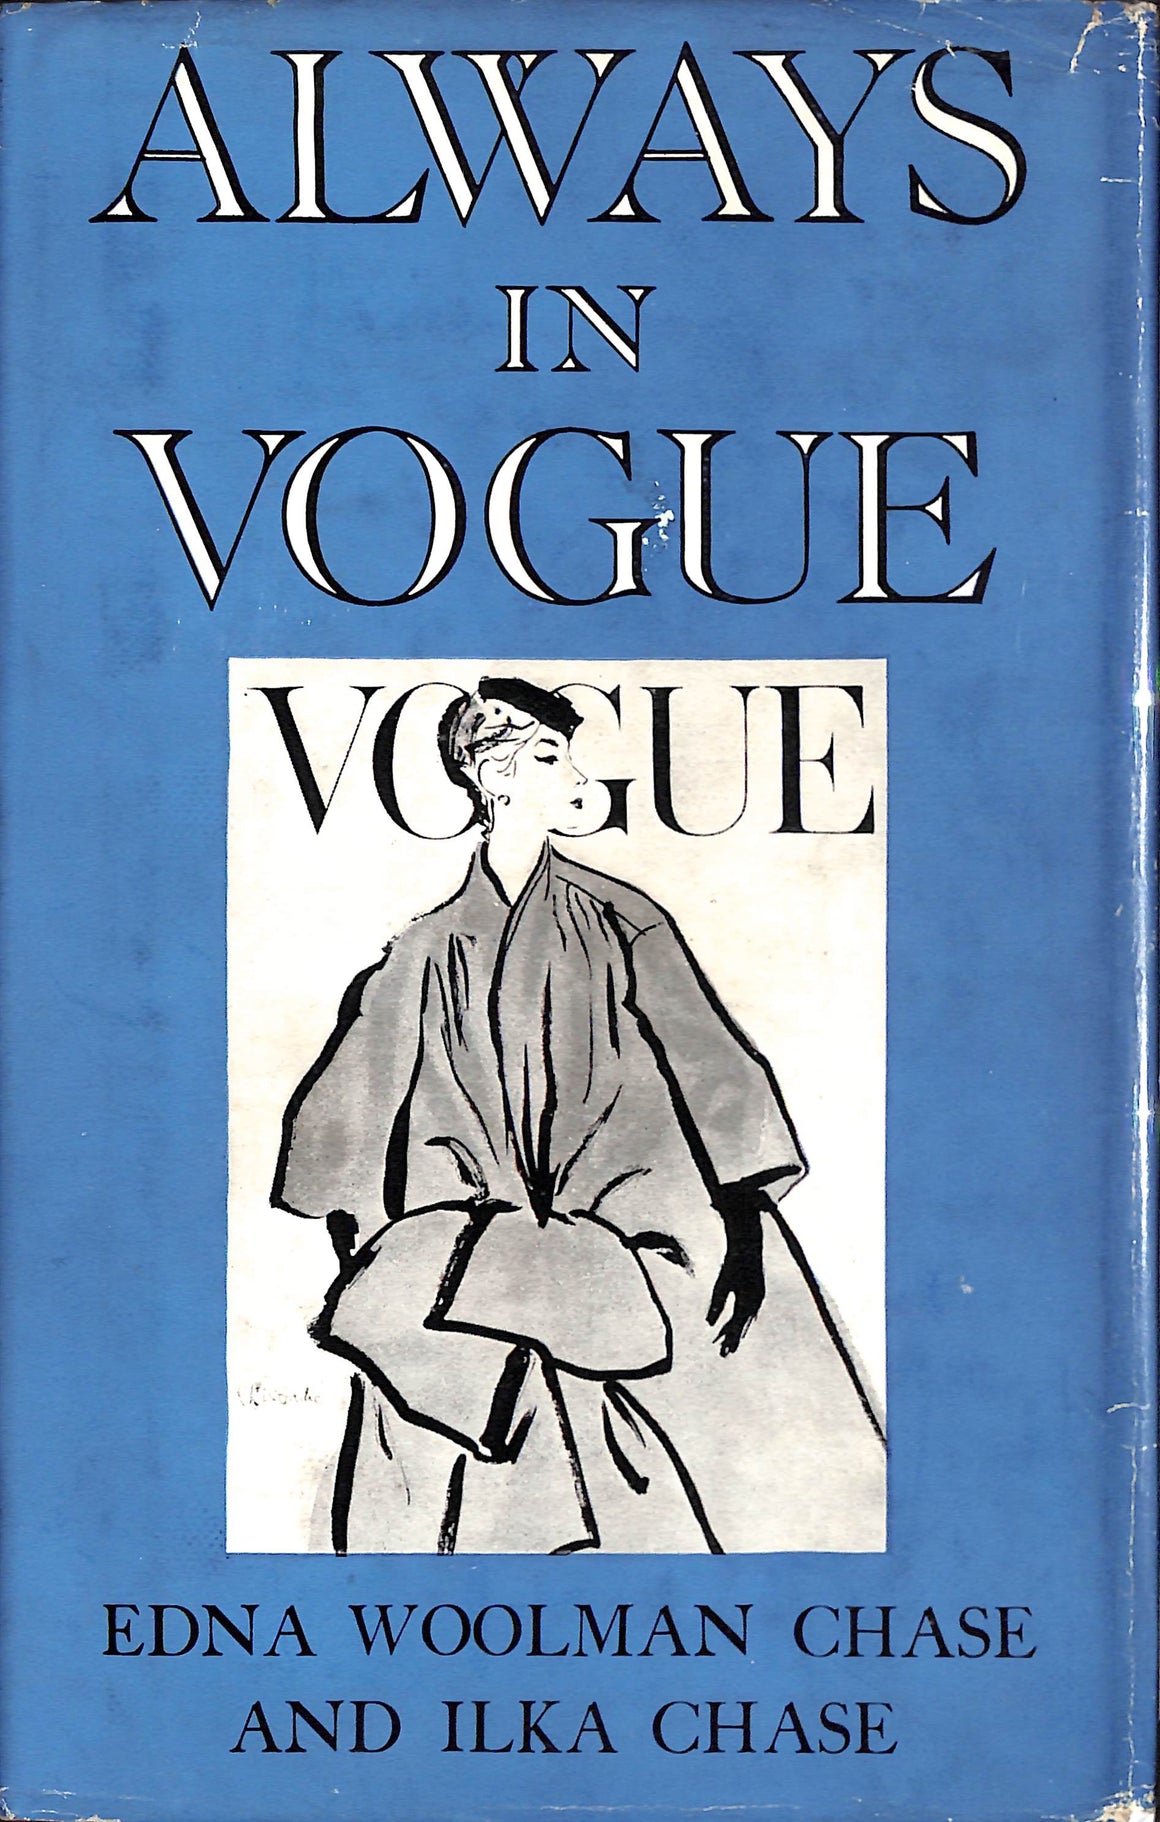 "Always In Vogue" 1954 CHASE, Edna Woolman and Ilka (SOLD)